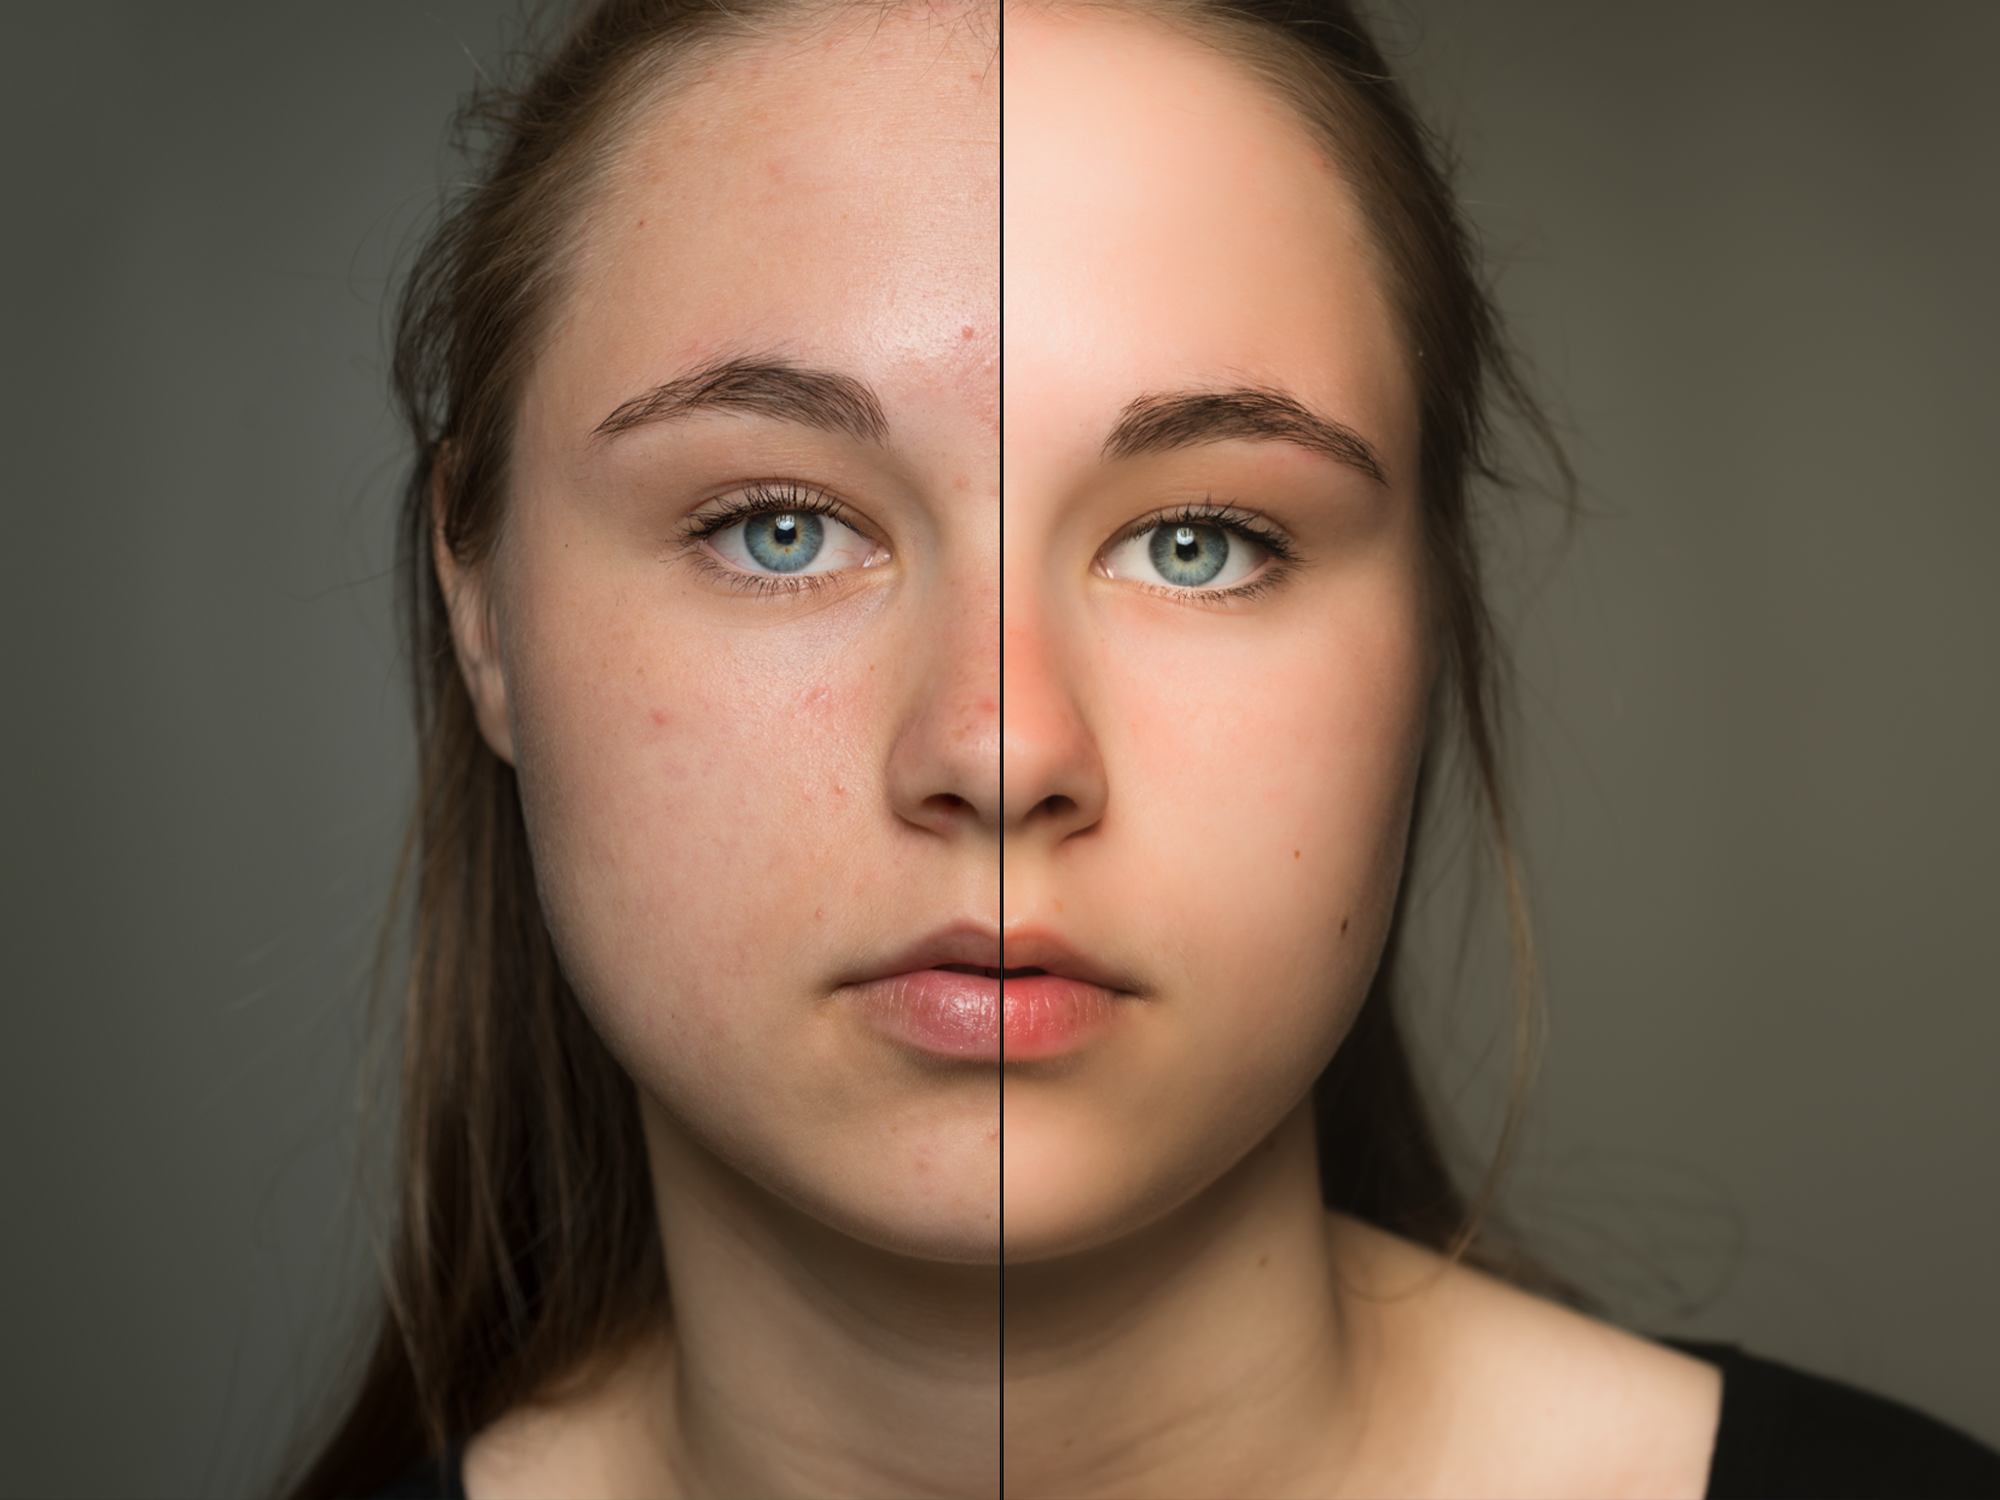 How to Use Lightroom: Fix Wrinkles, Pimples, and Smooth the Skin